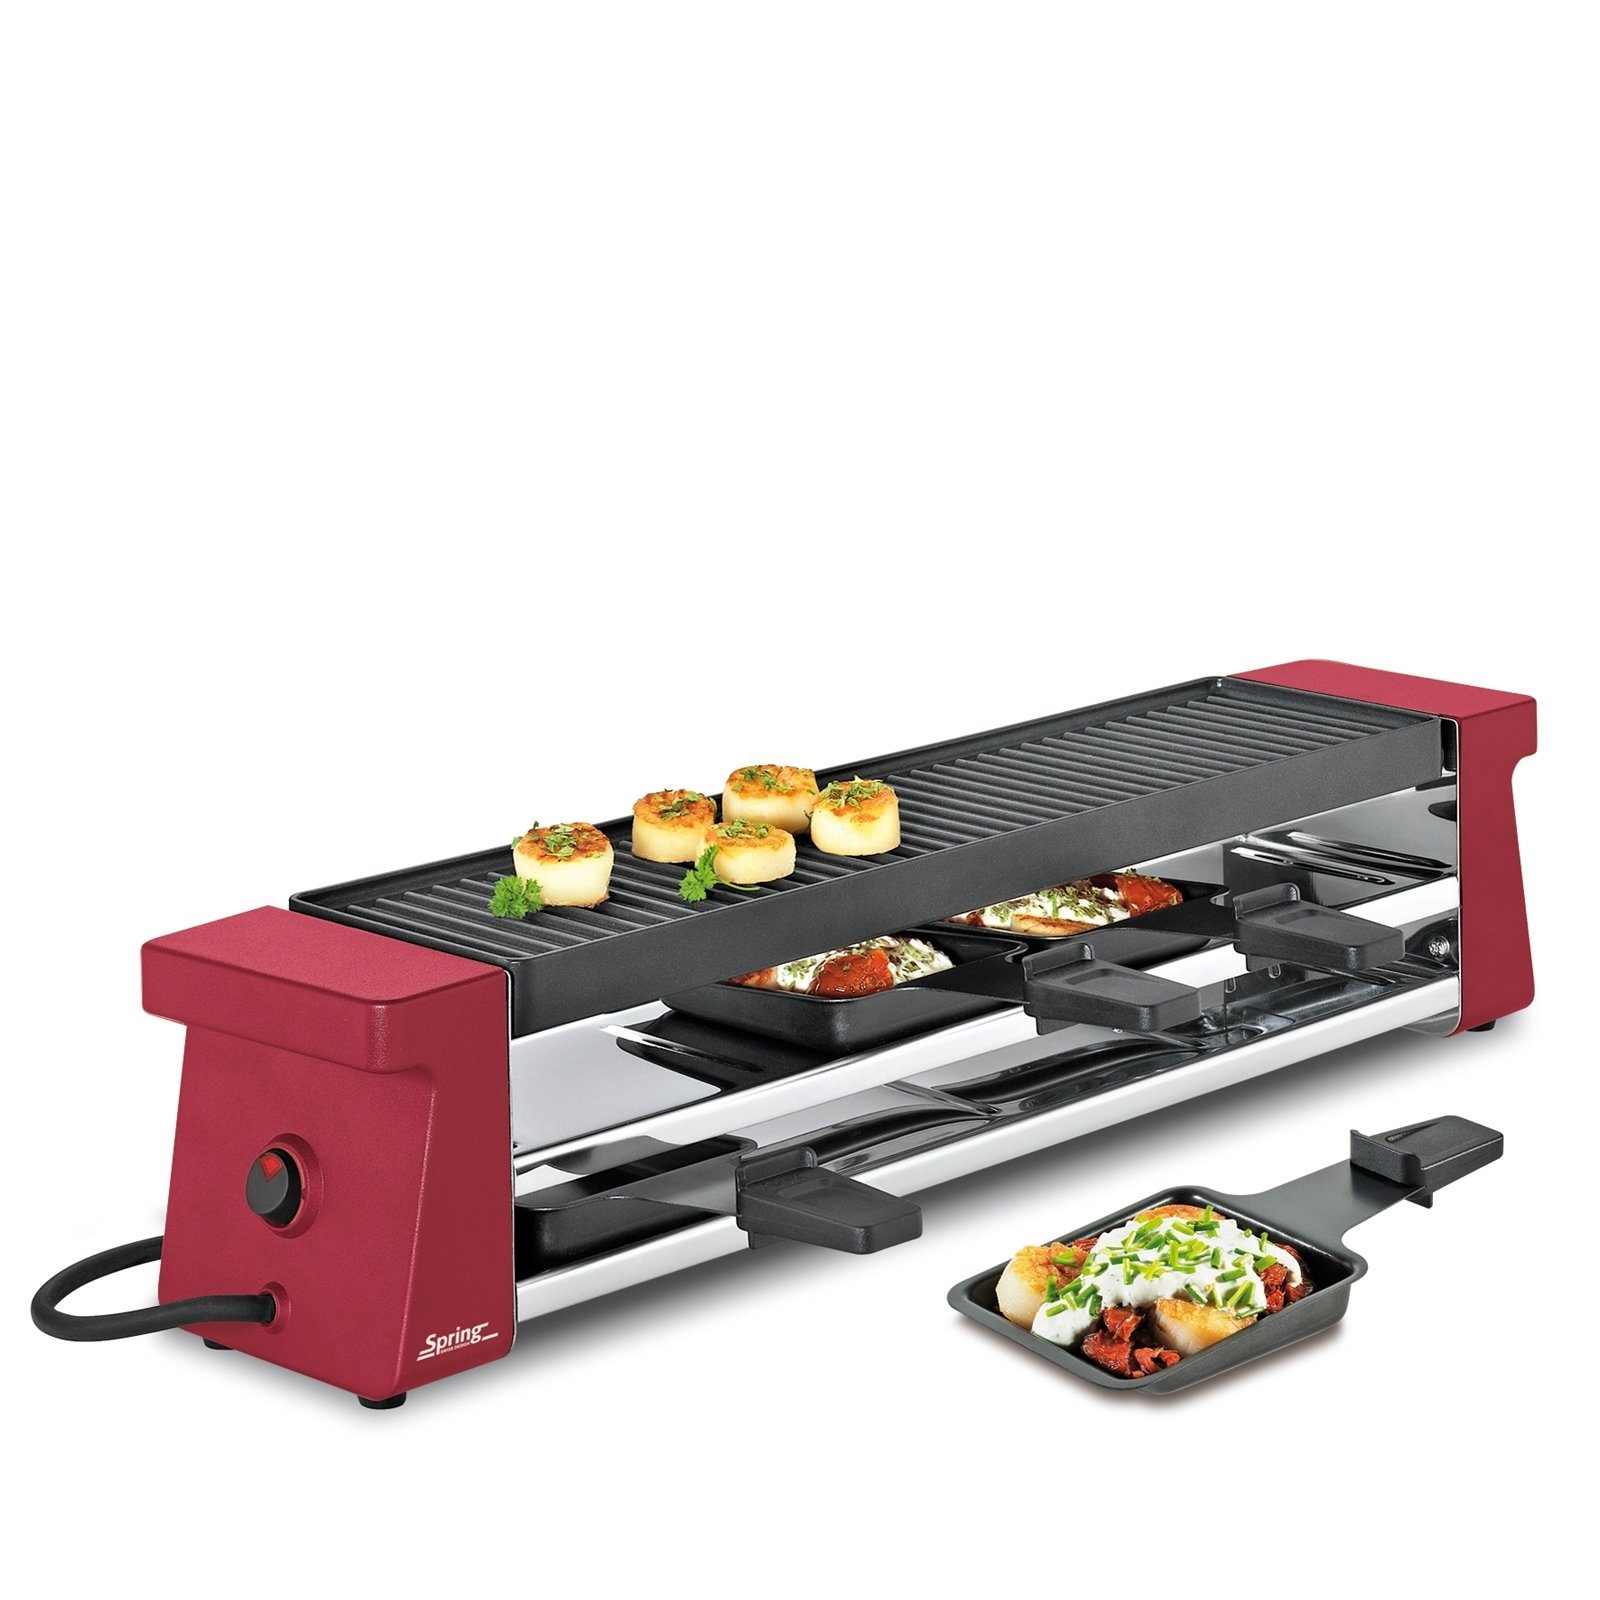 Spring Raclette Compact Raclette 4